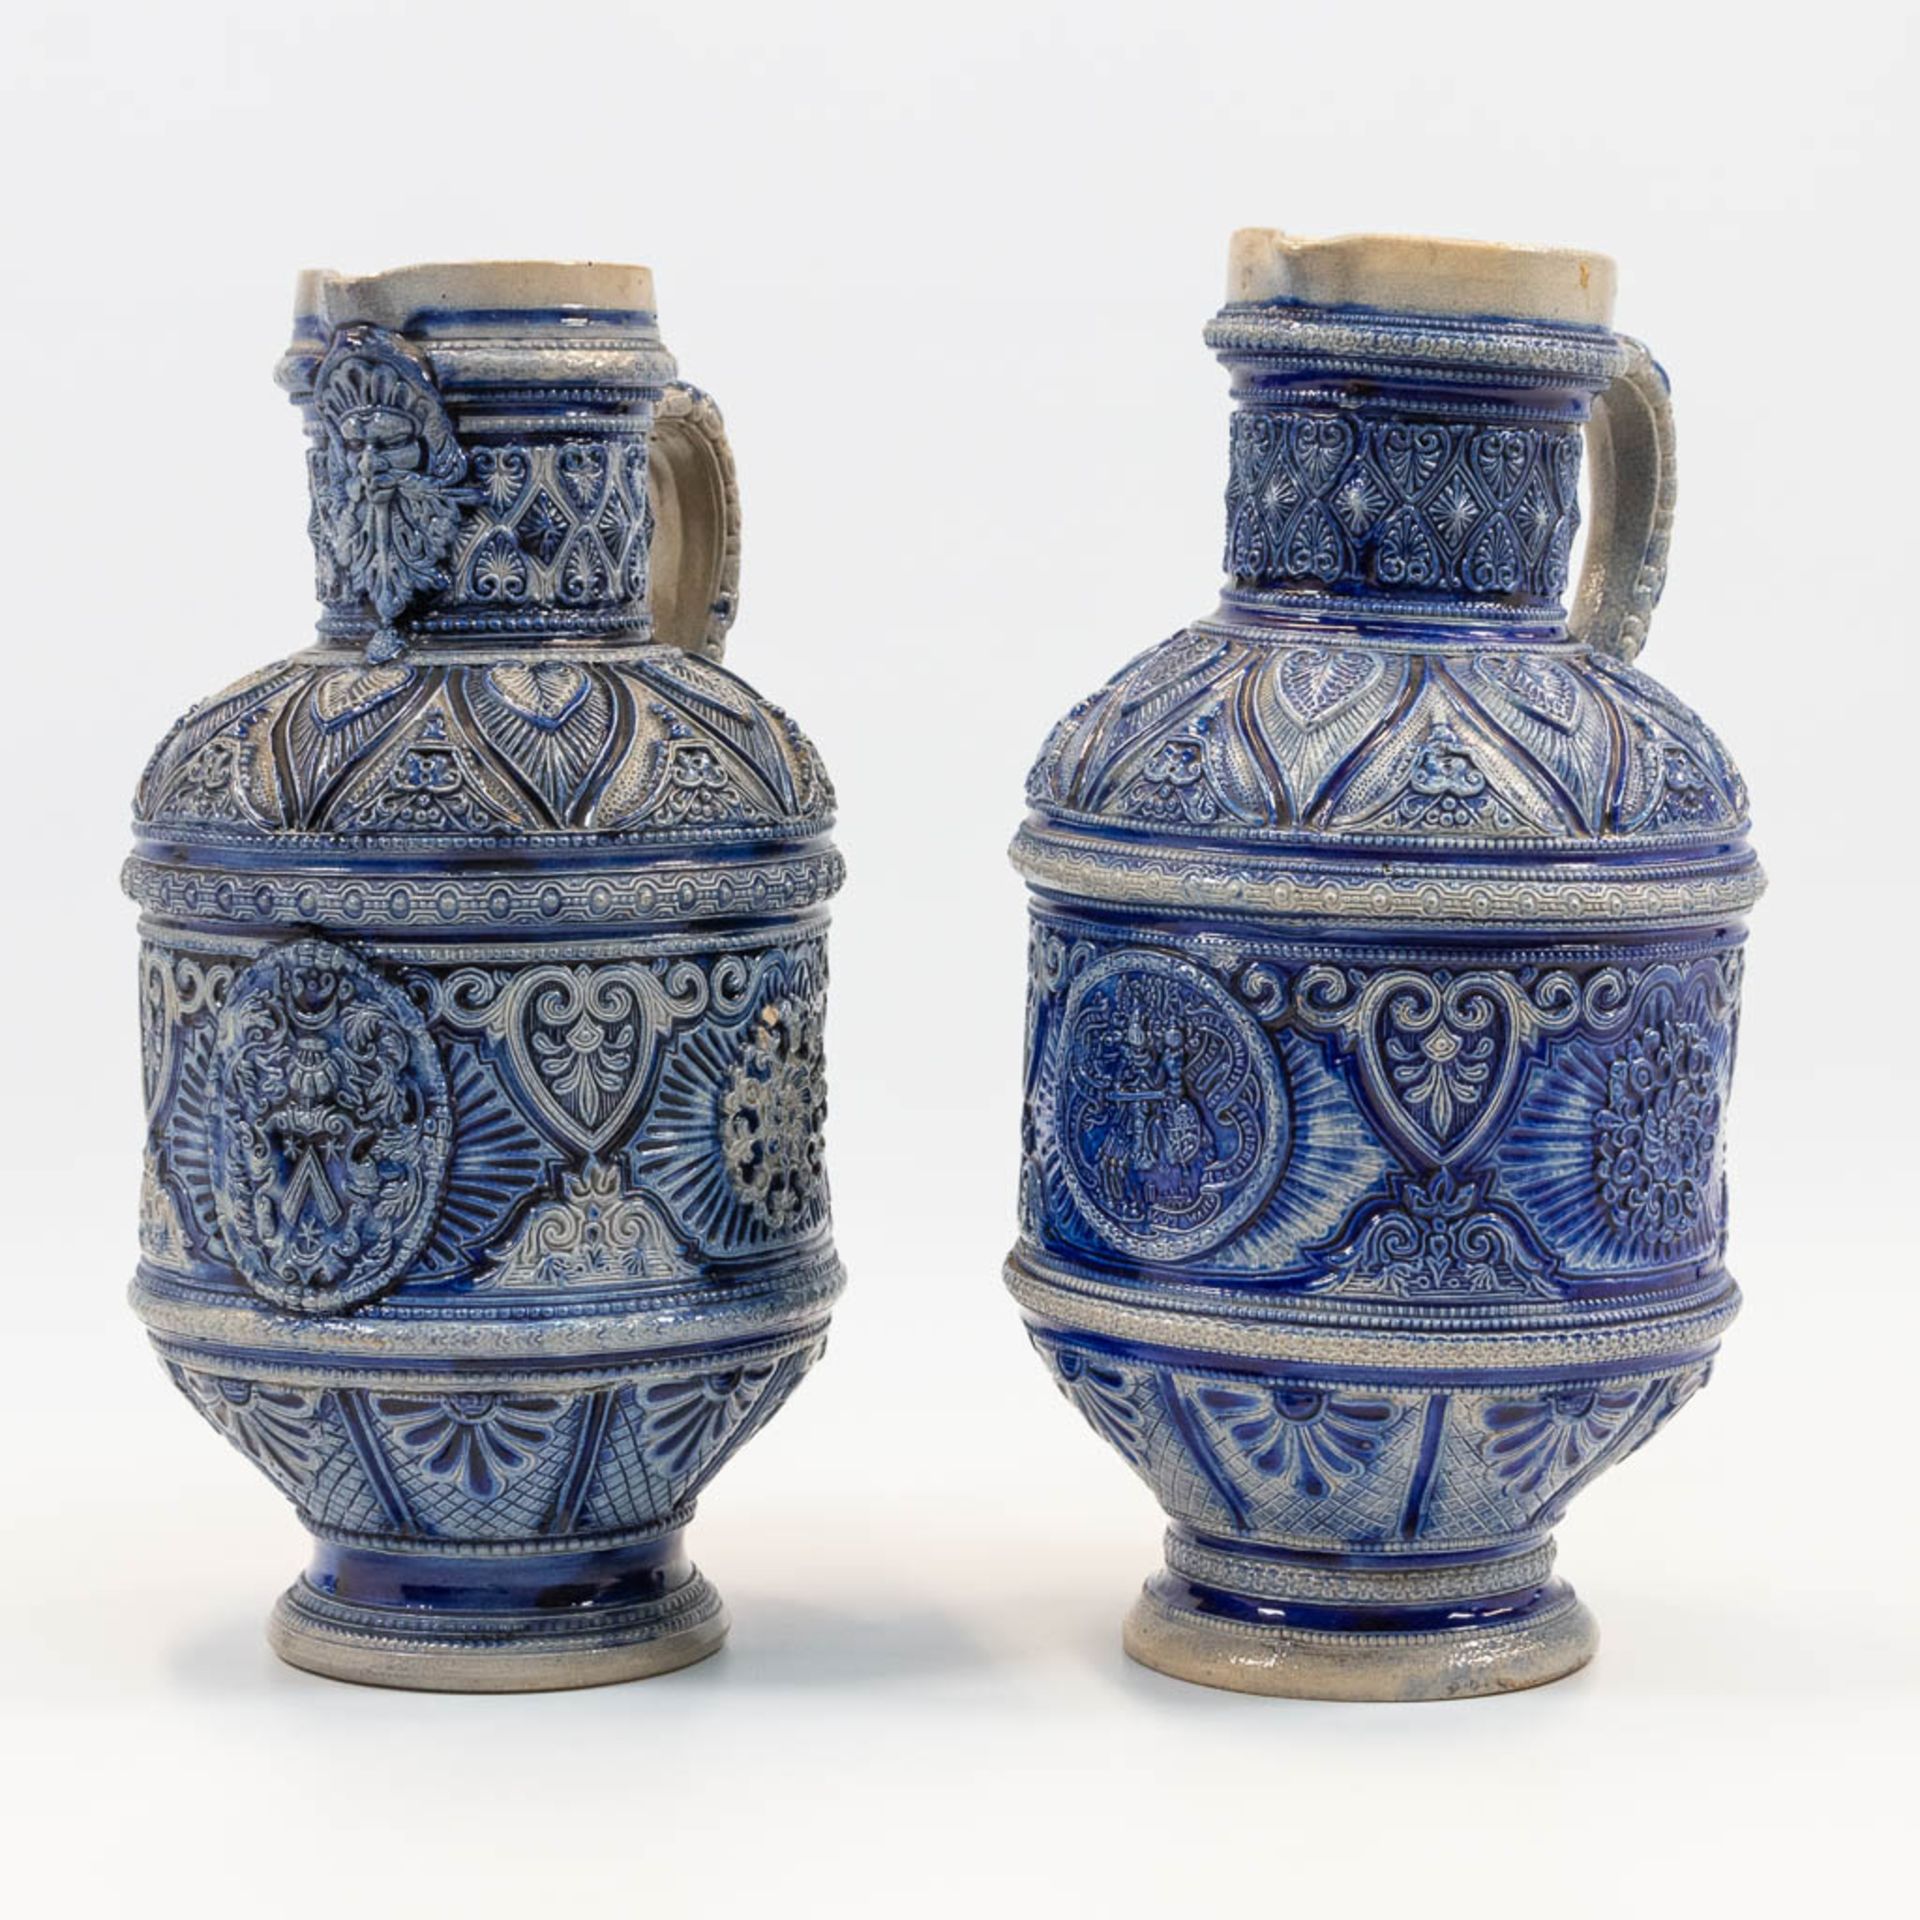 A collection of 2 Westerwald Pitchers with blue glaze, of which one has a Bartmann. (32 x 18 cm) - Image 3 of 14